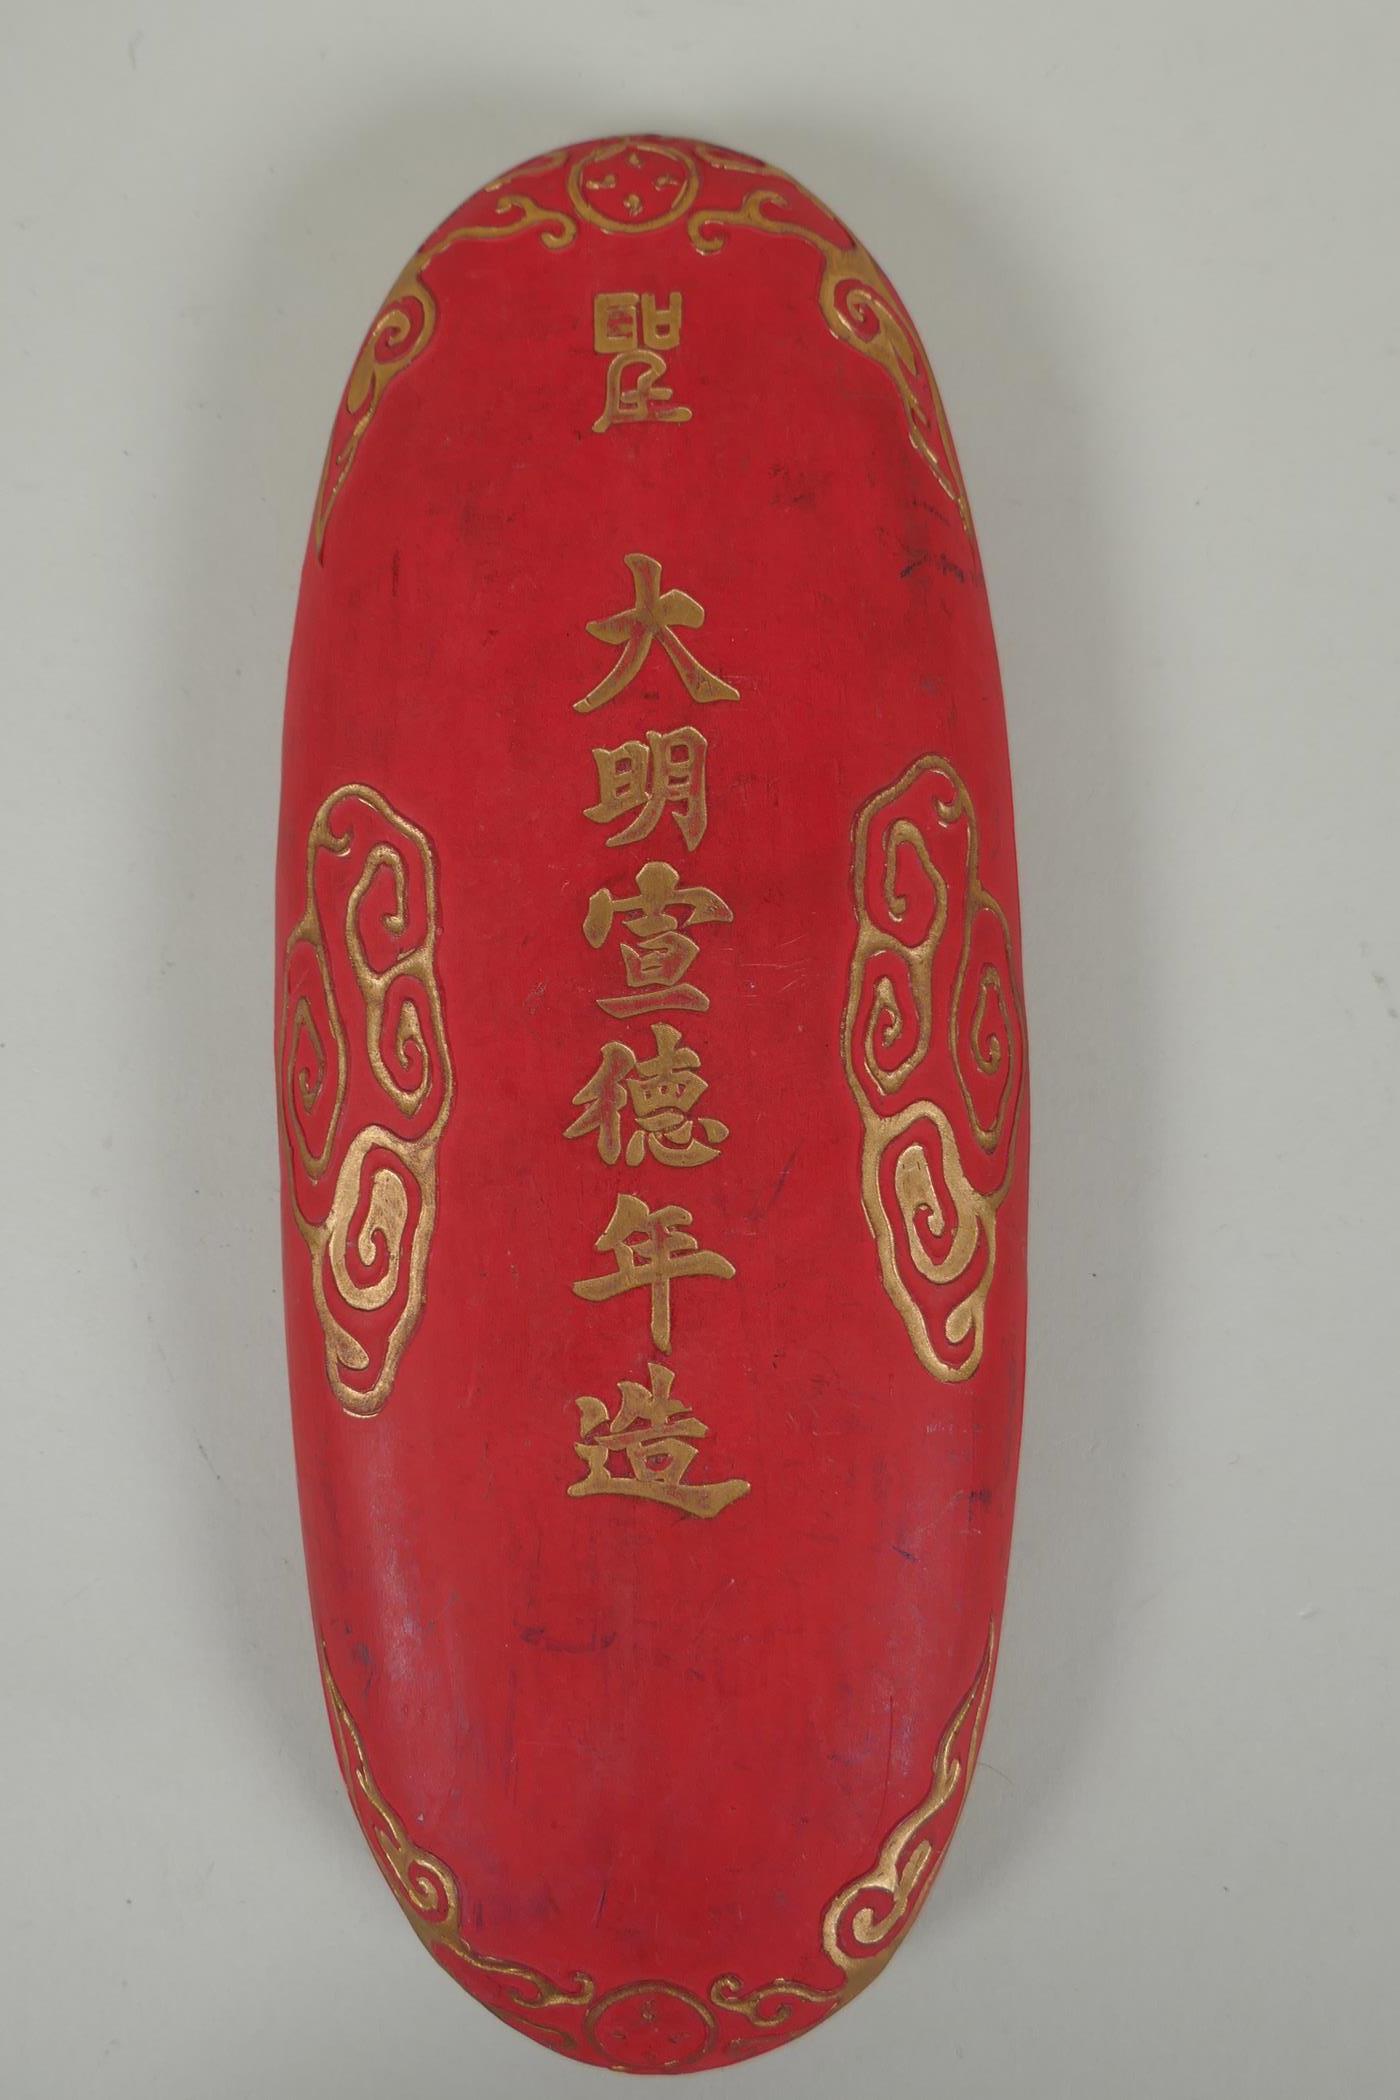 A Chinese red and gilt ink stone/block with raised dragon and character inscription decoration, 10 x - Image 2 of 2